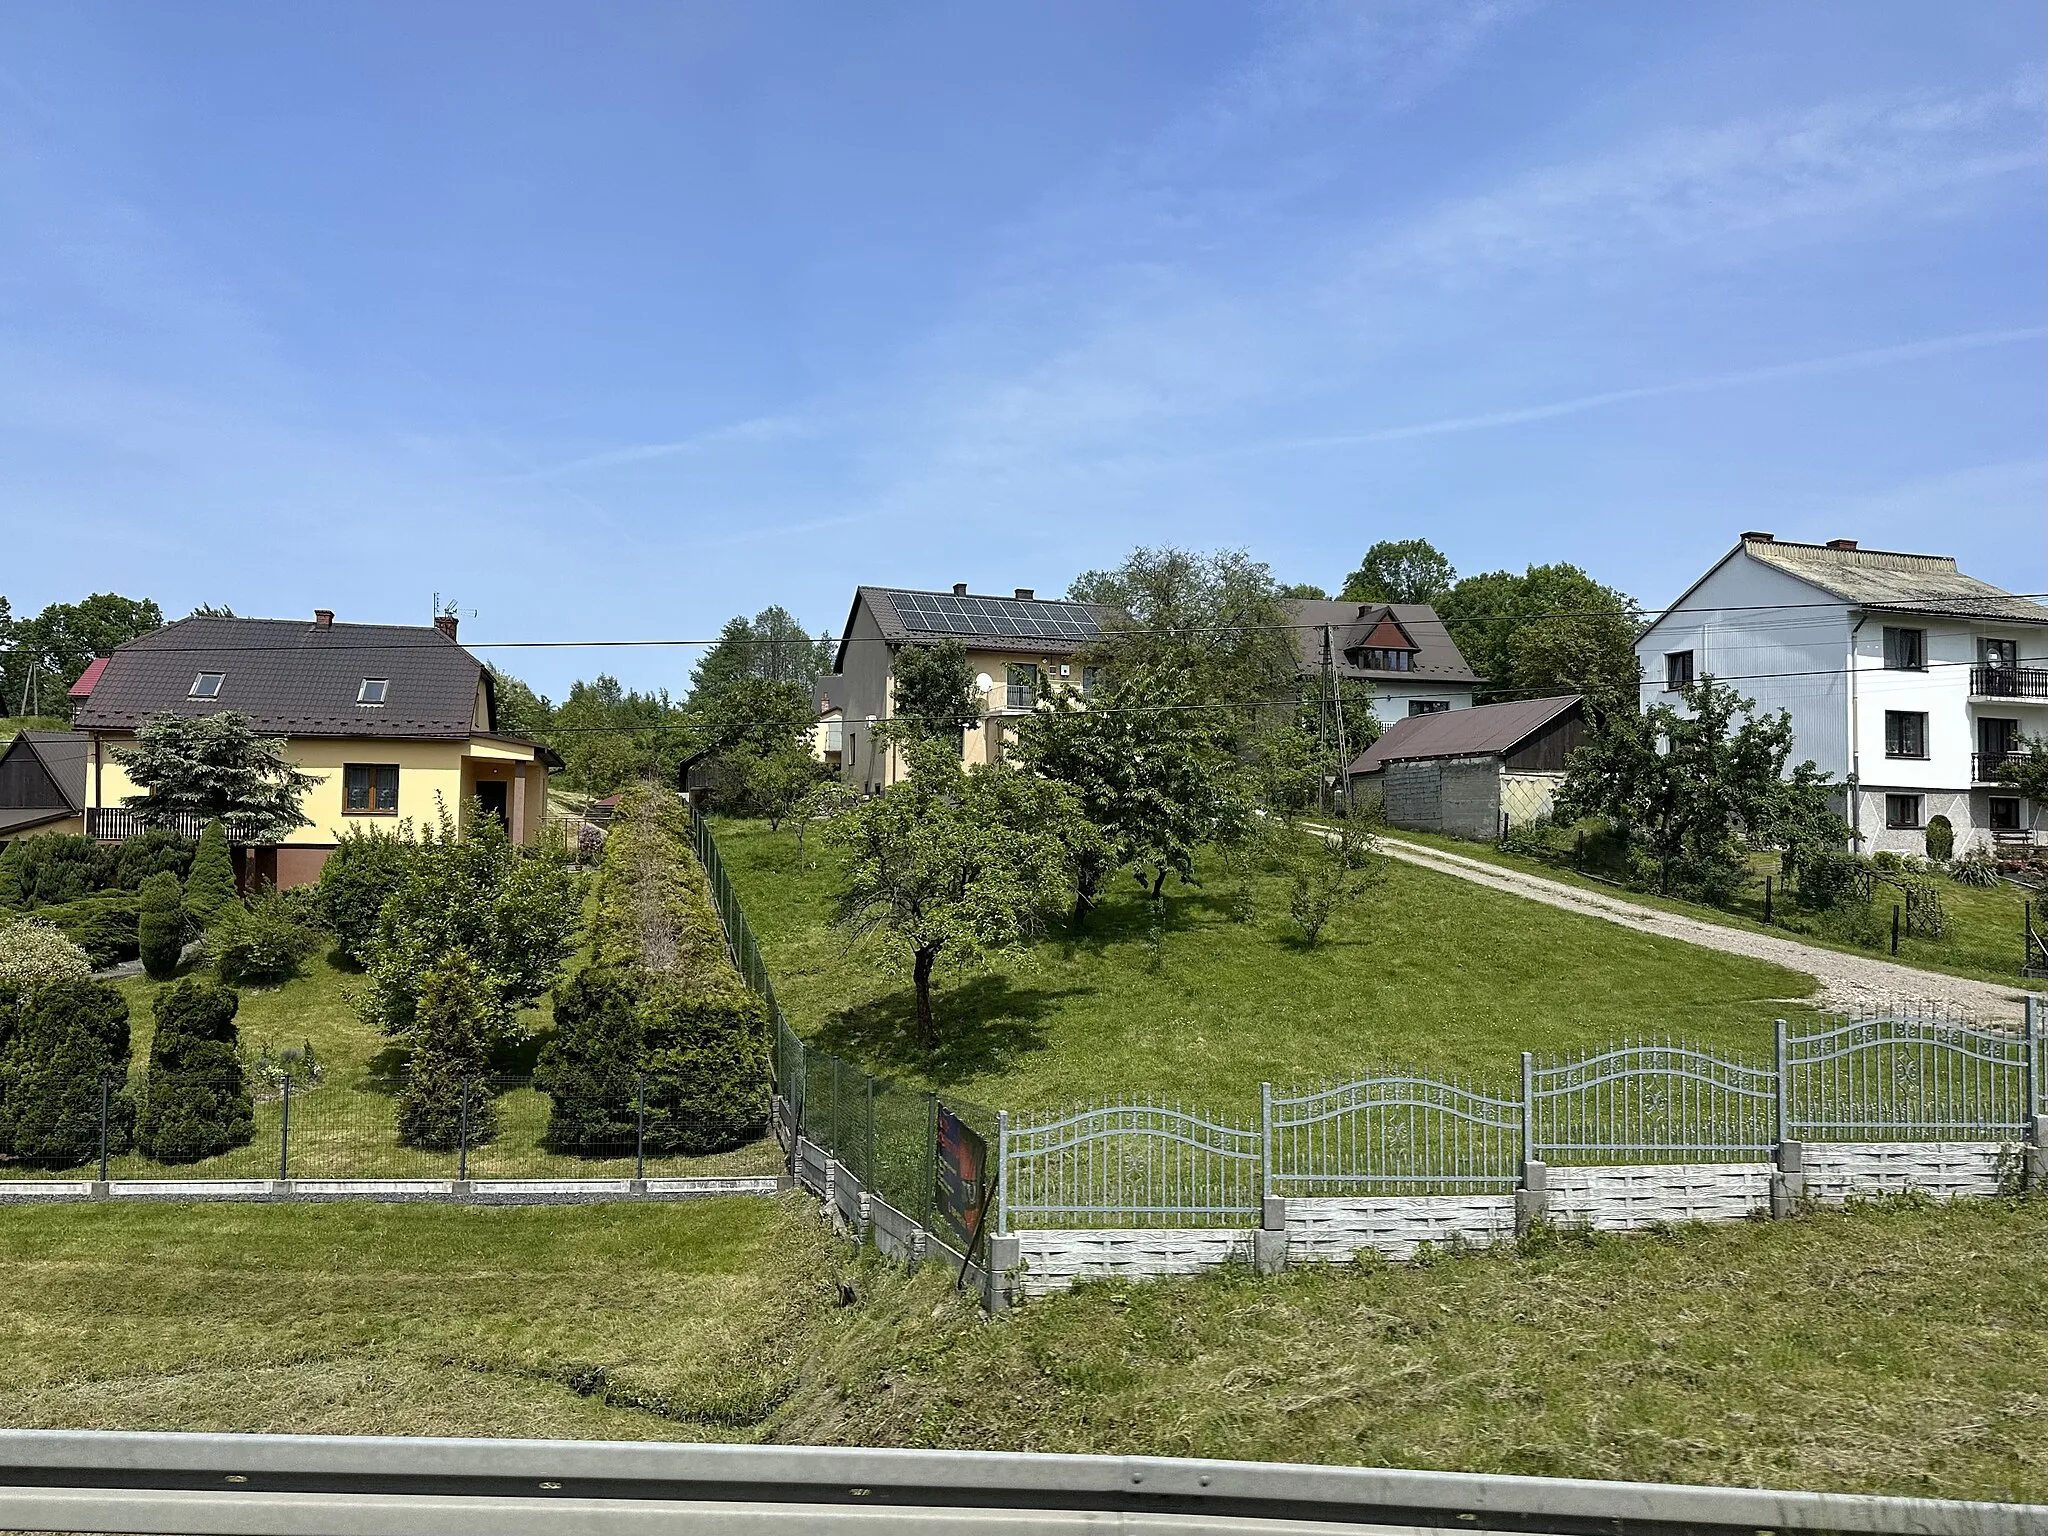 Photo showing: Panoramiczna 2 and other houses in Brodła village in Chrzanów County, Lesser Poland Voivodeship, Poland